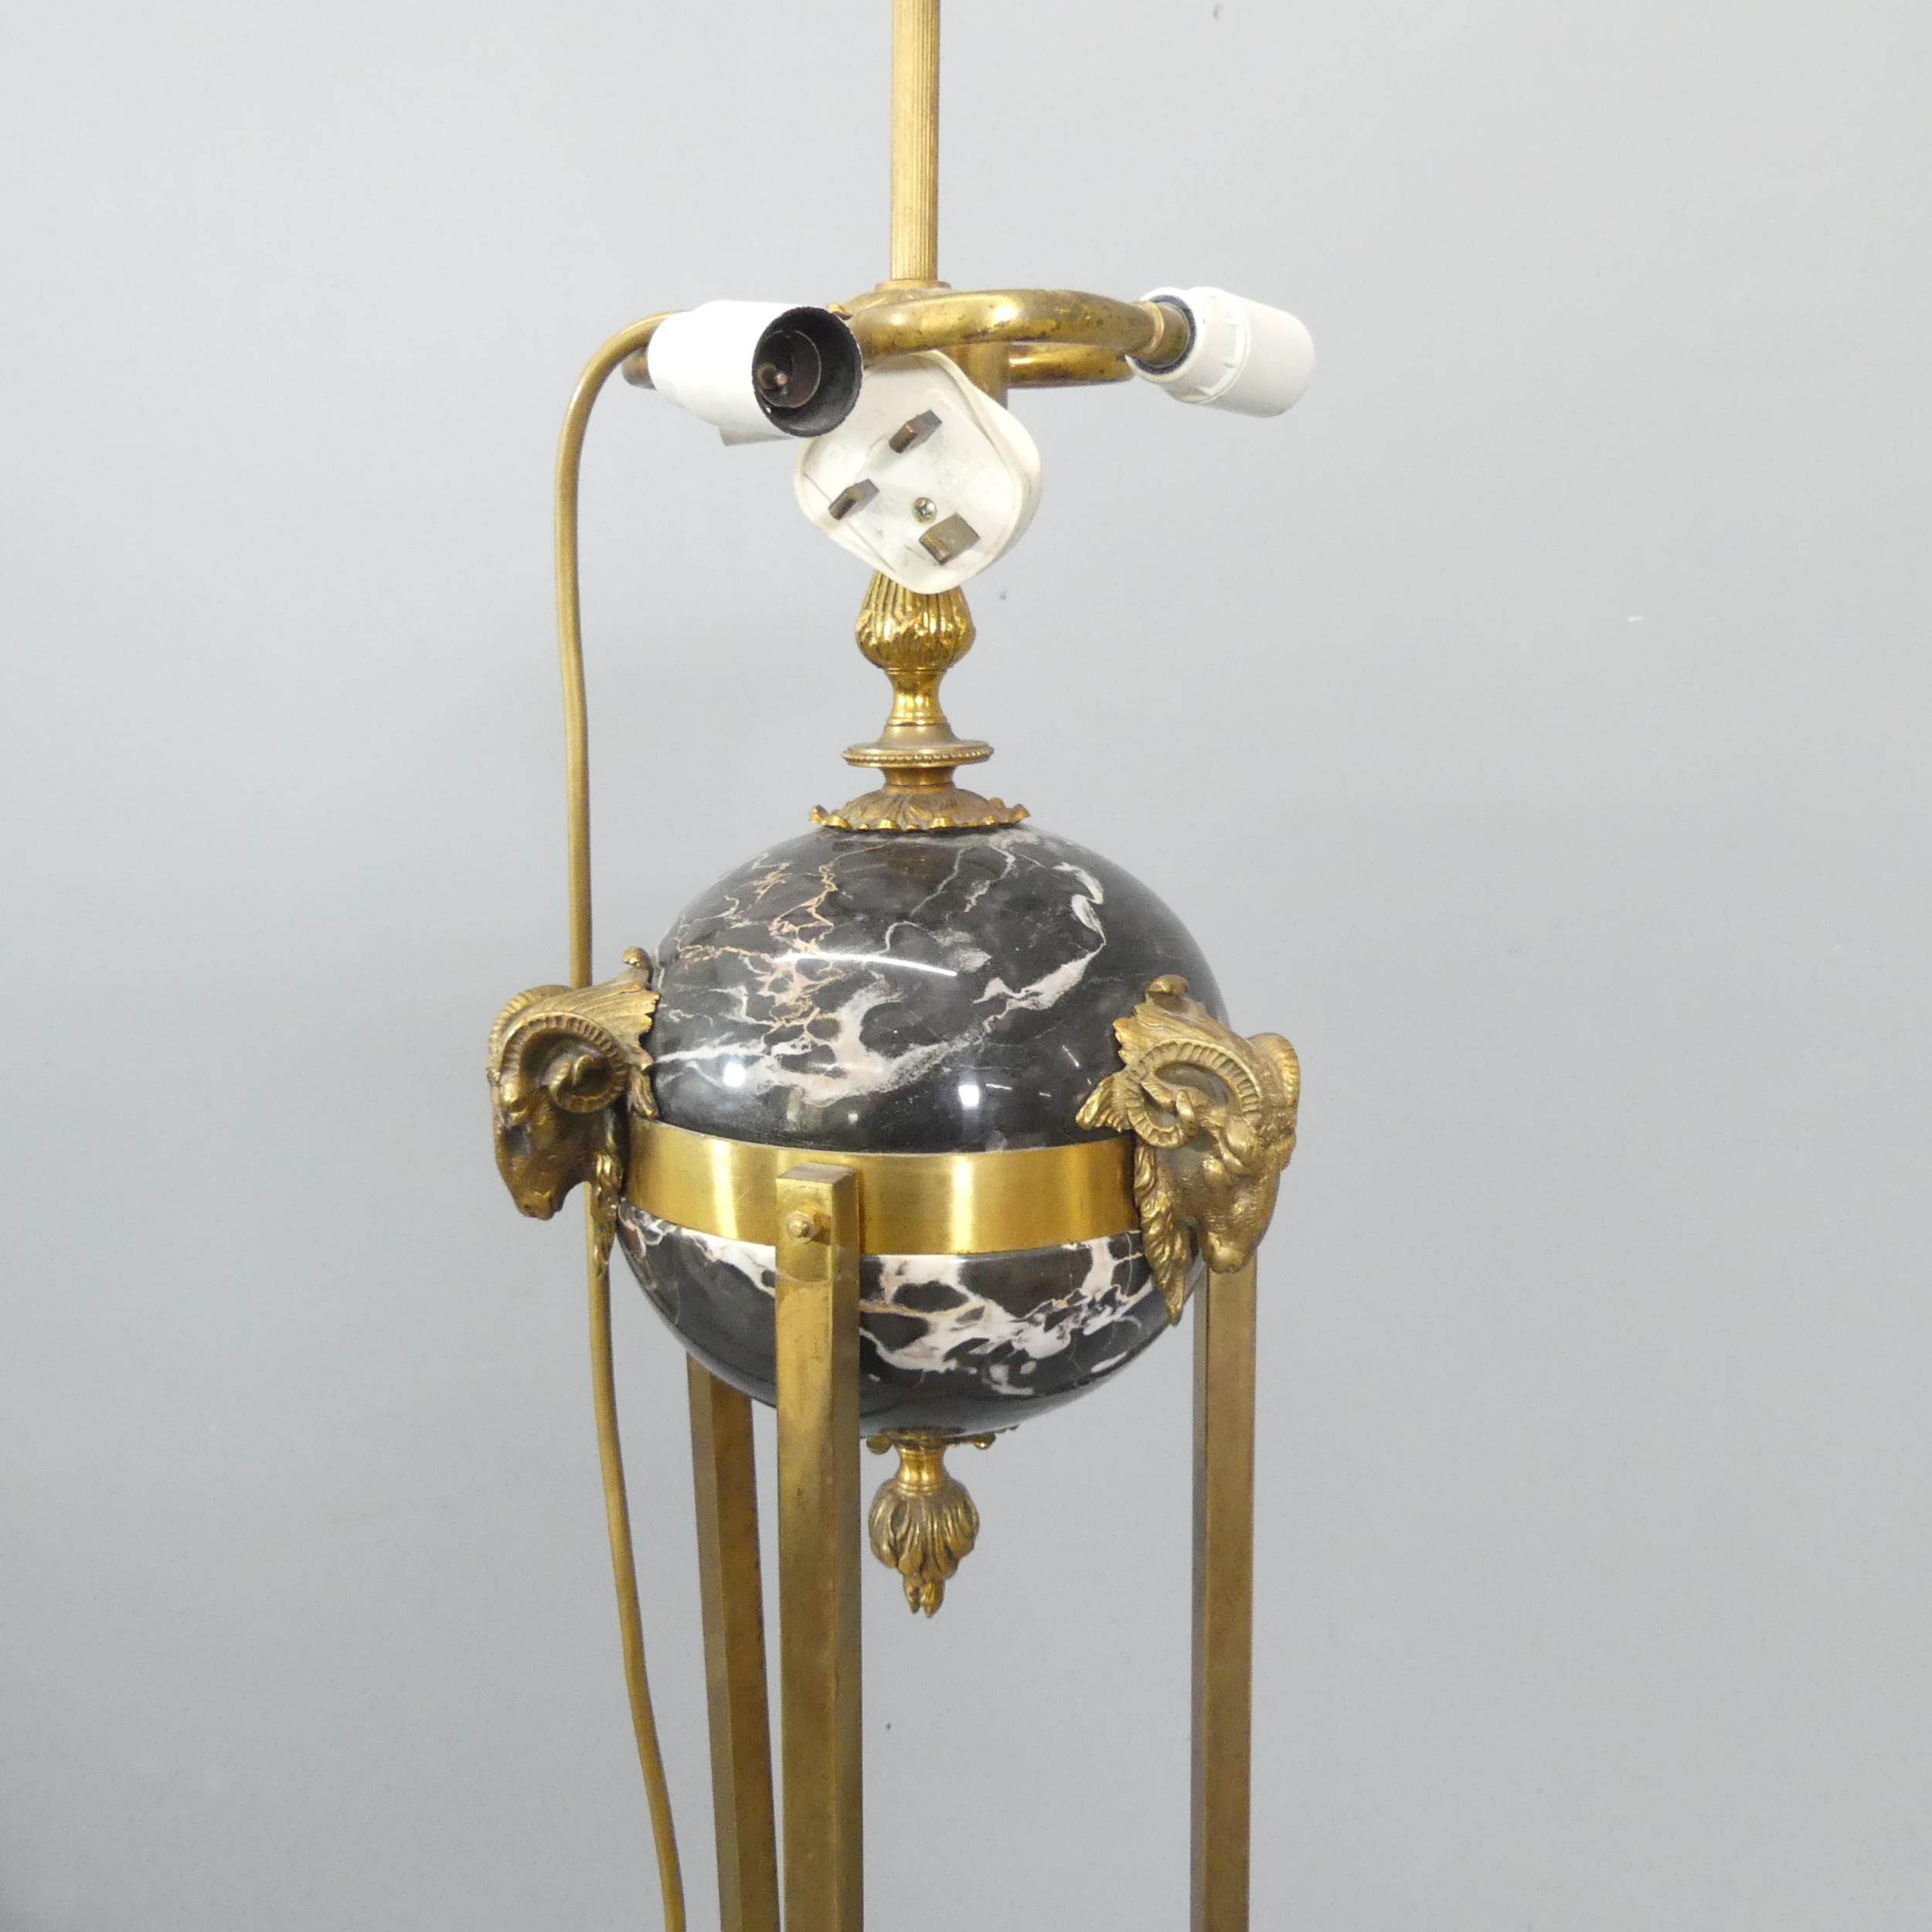 An Empire style brass standard lamp, with marble ball and and rams-head mounts. Height overall - Image 2 of 2